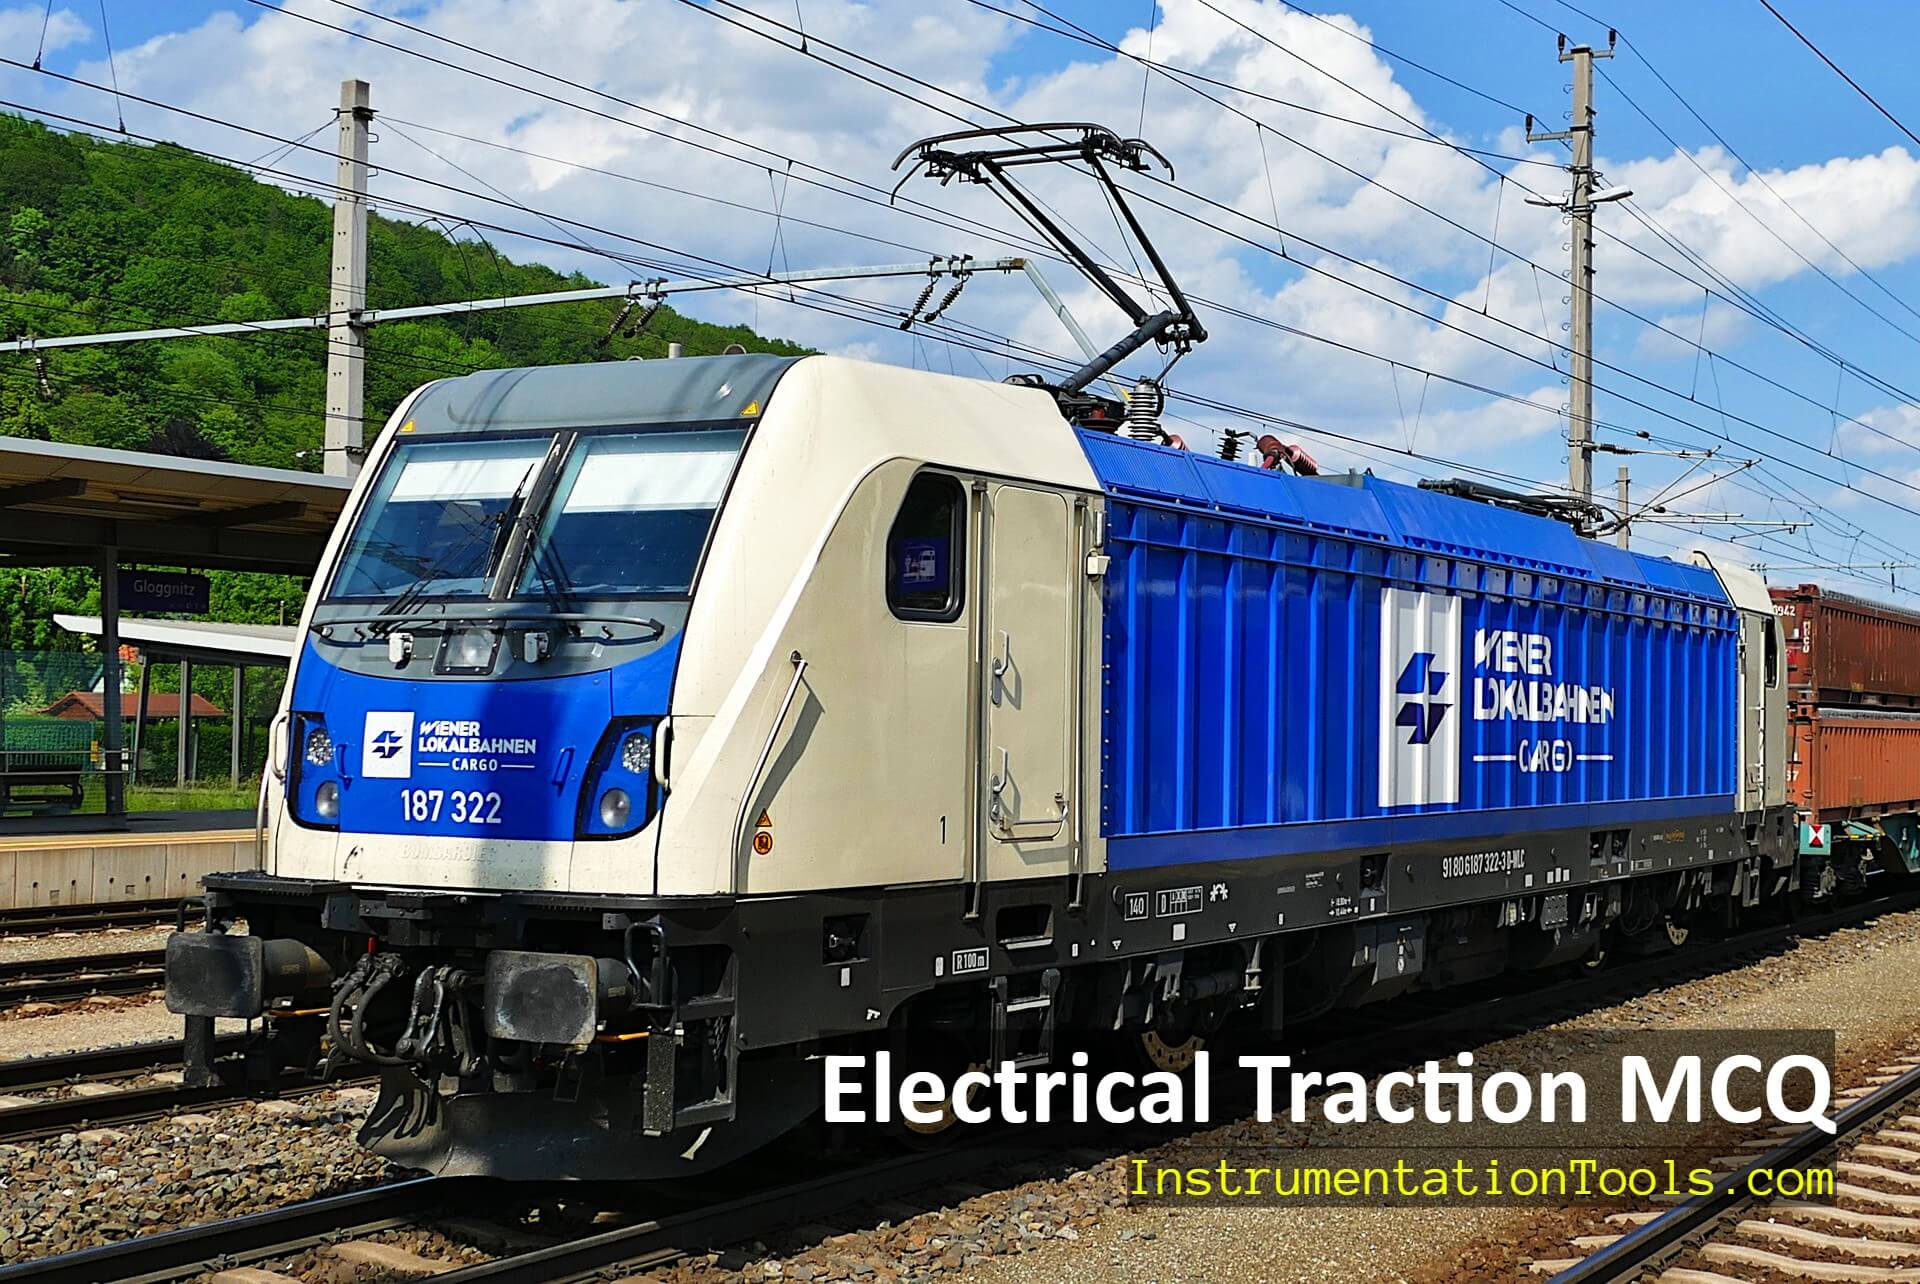 Electrical Traction Multiple Choice Questions and Answers